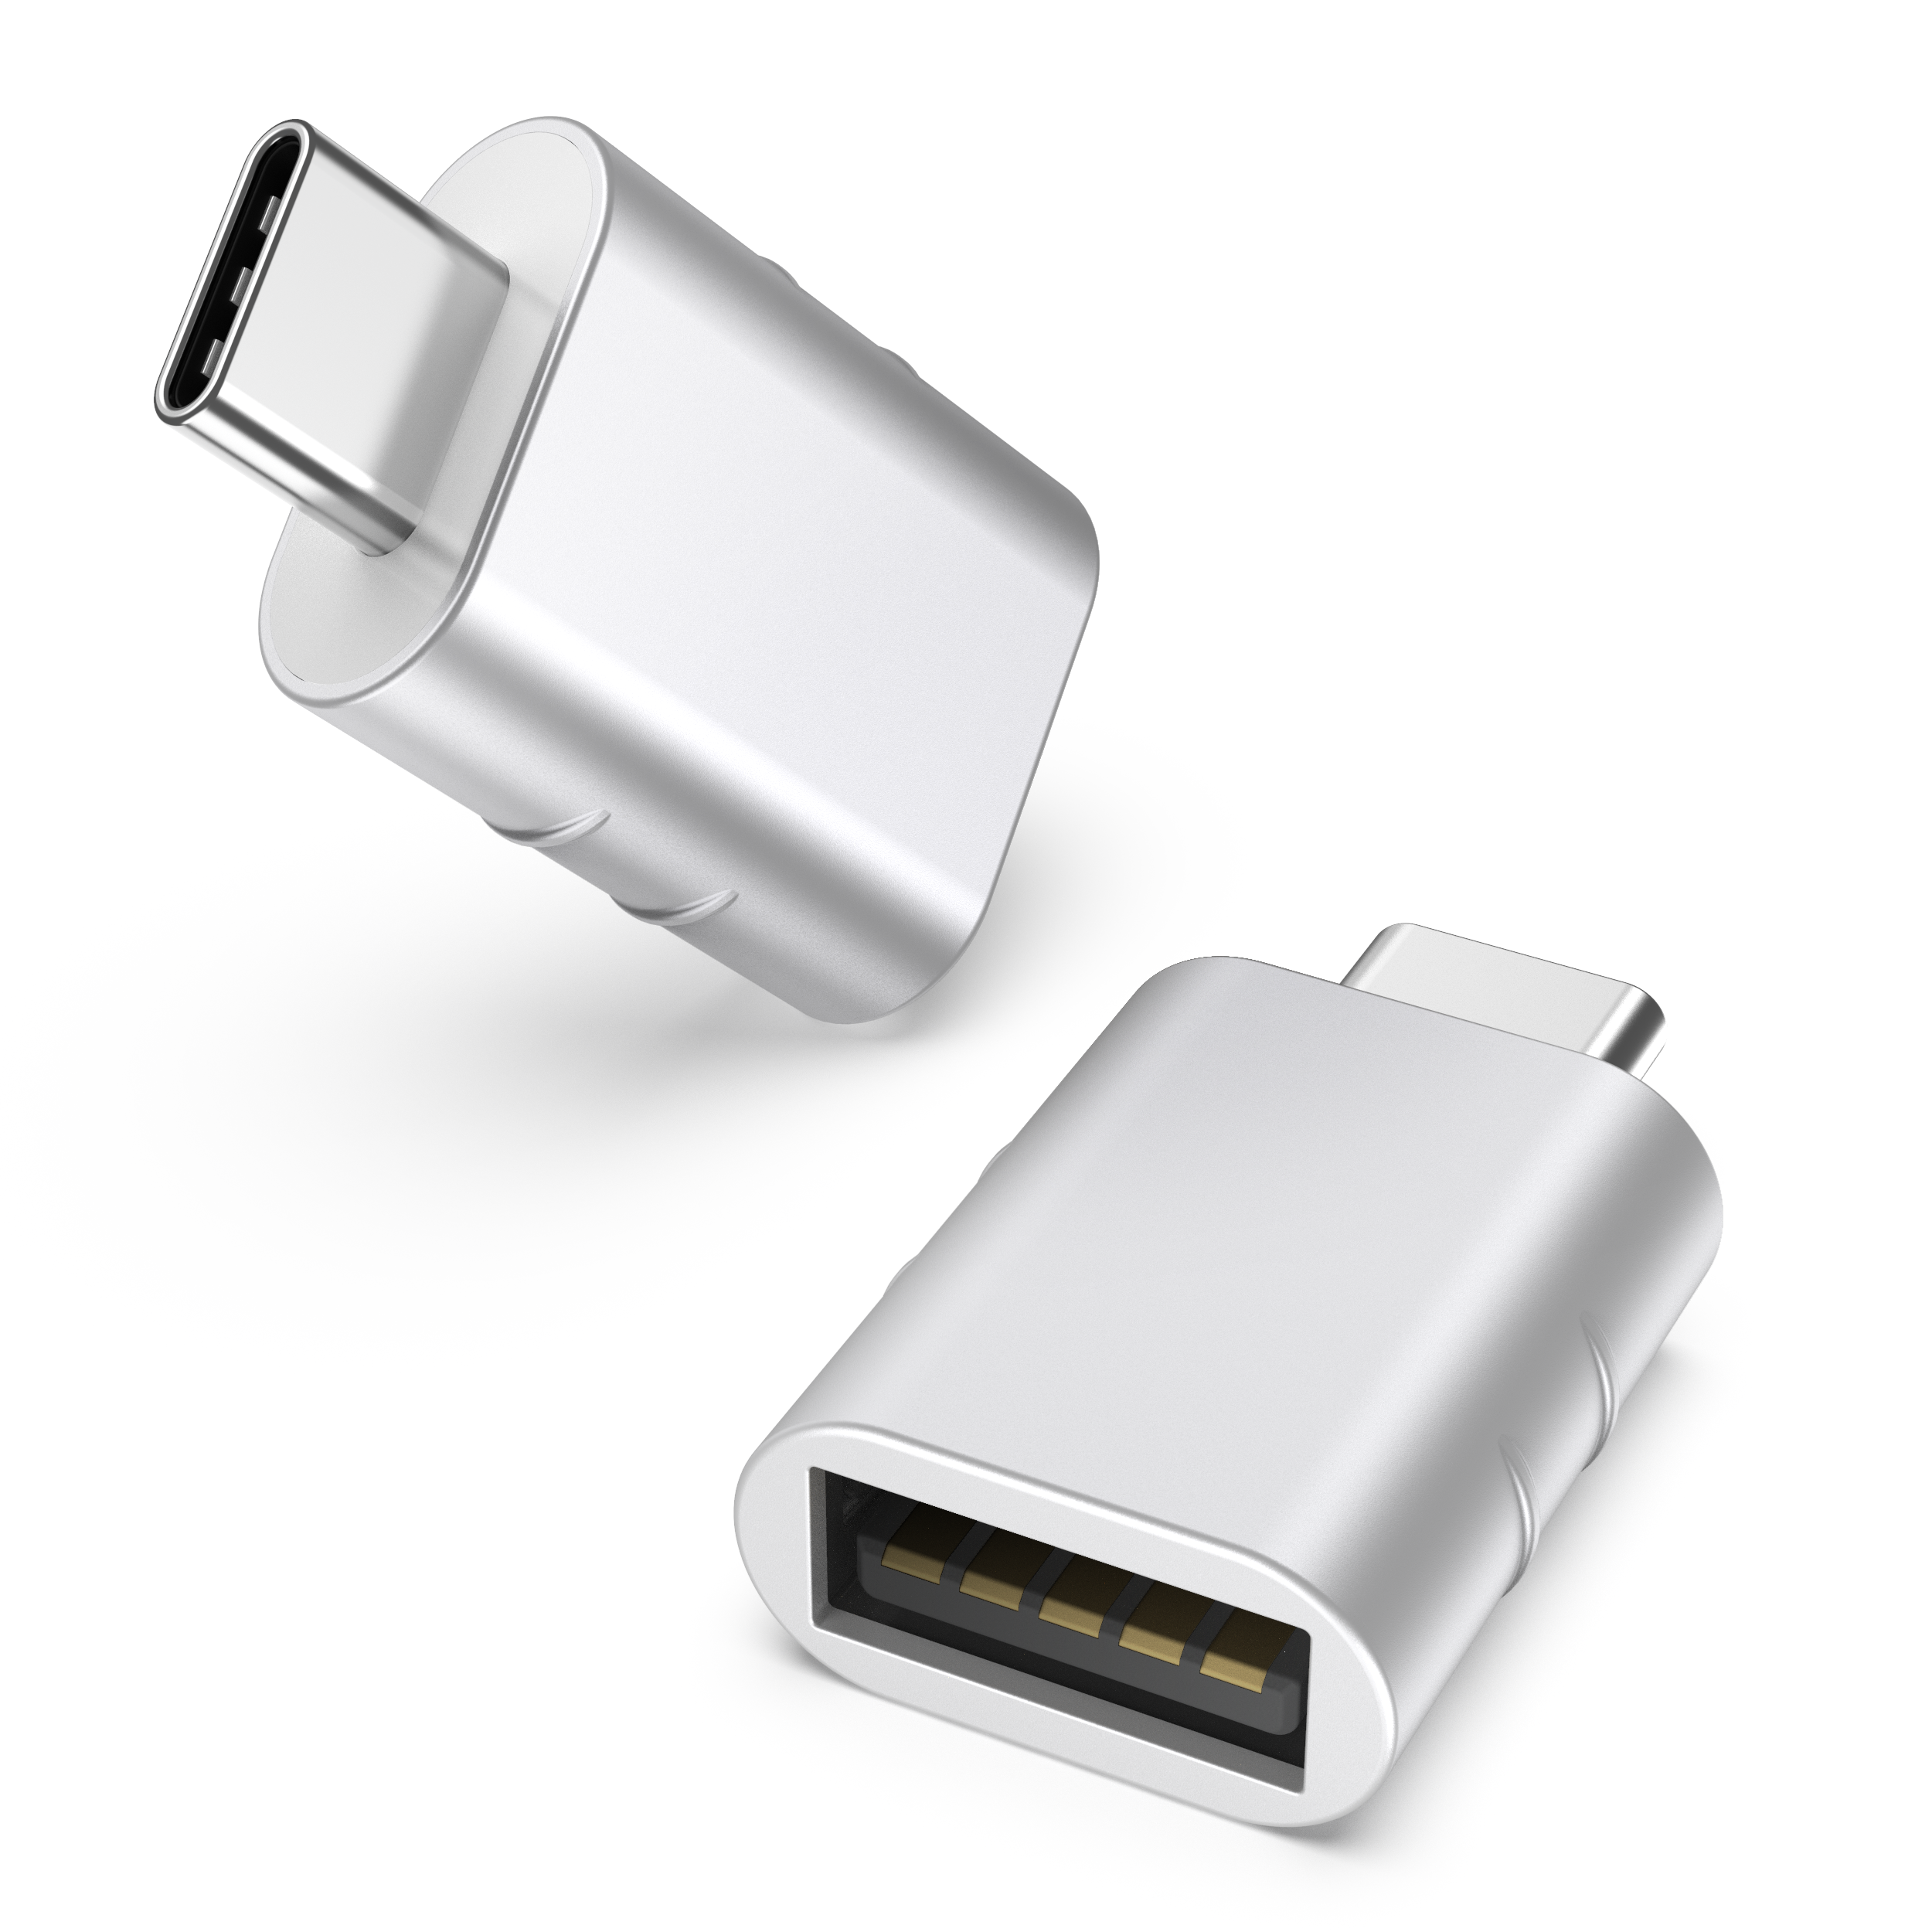 USB C Adapter (2 Pack), Anker USB C to USB Adapter High-Speed Data  Transfer, USB